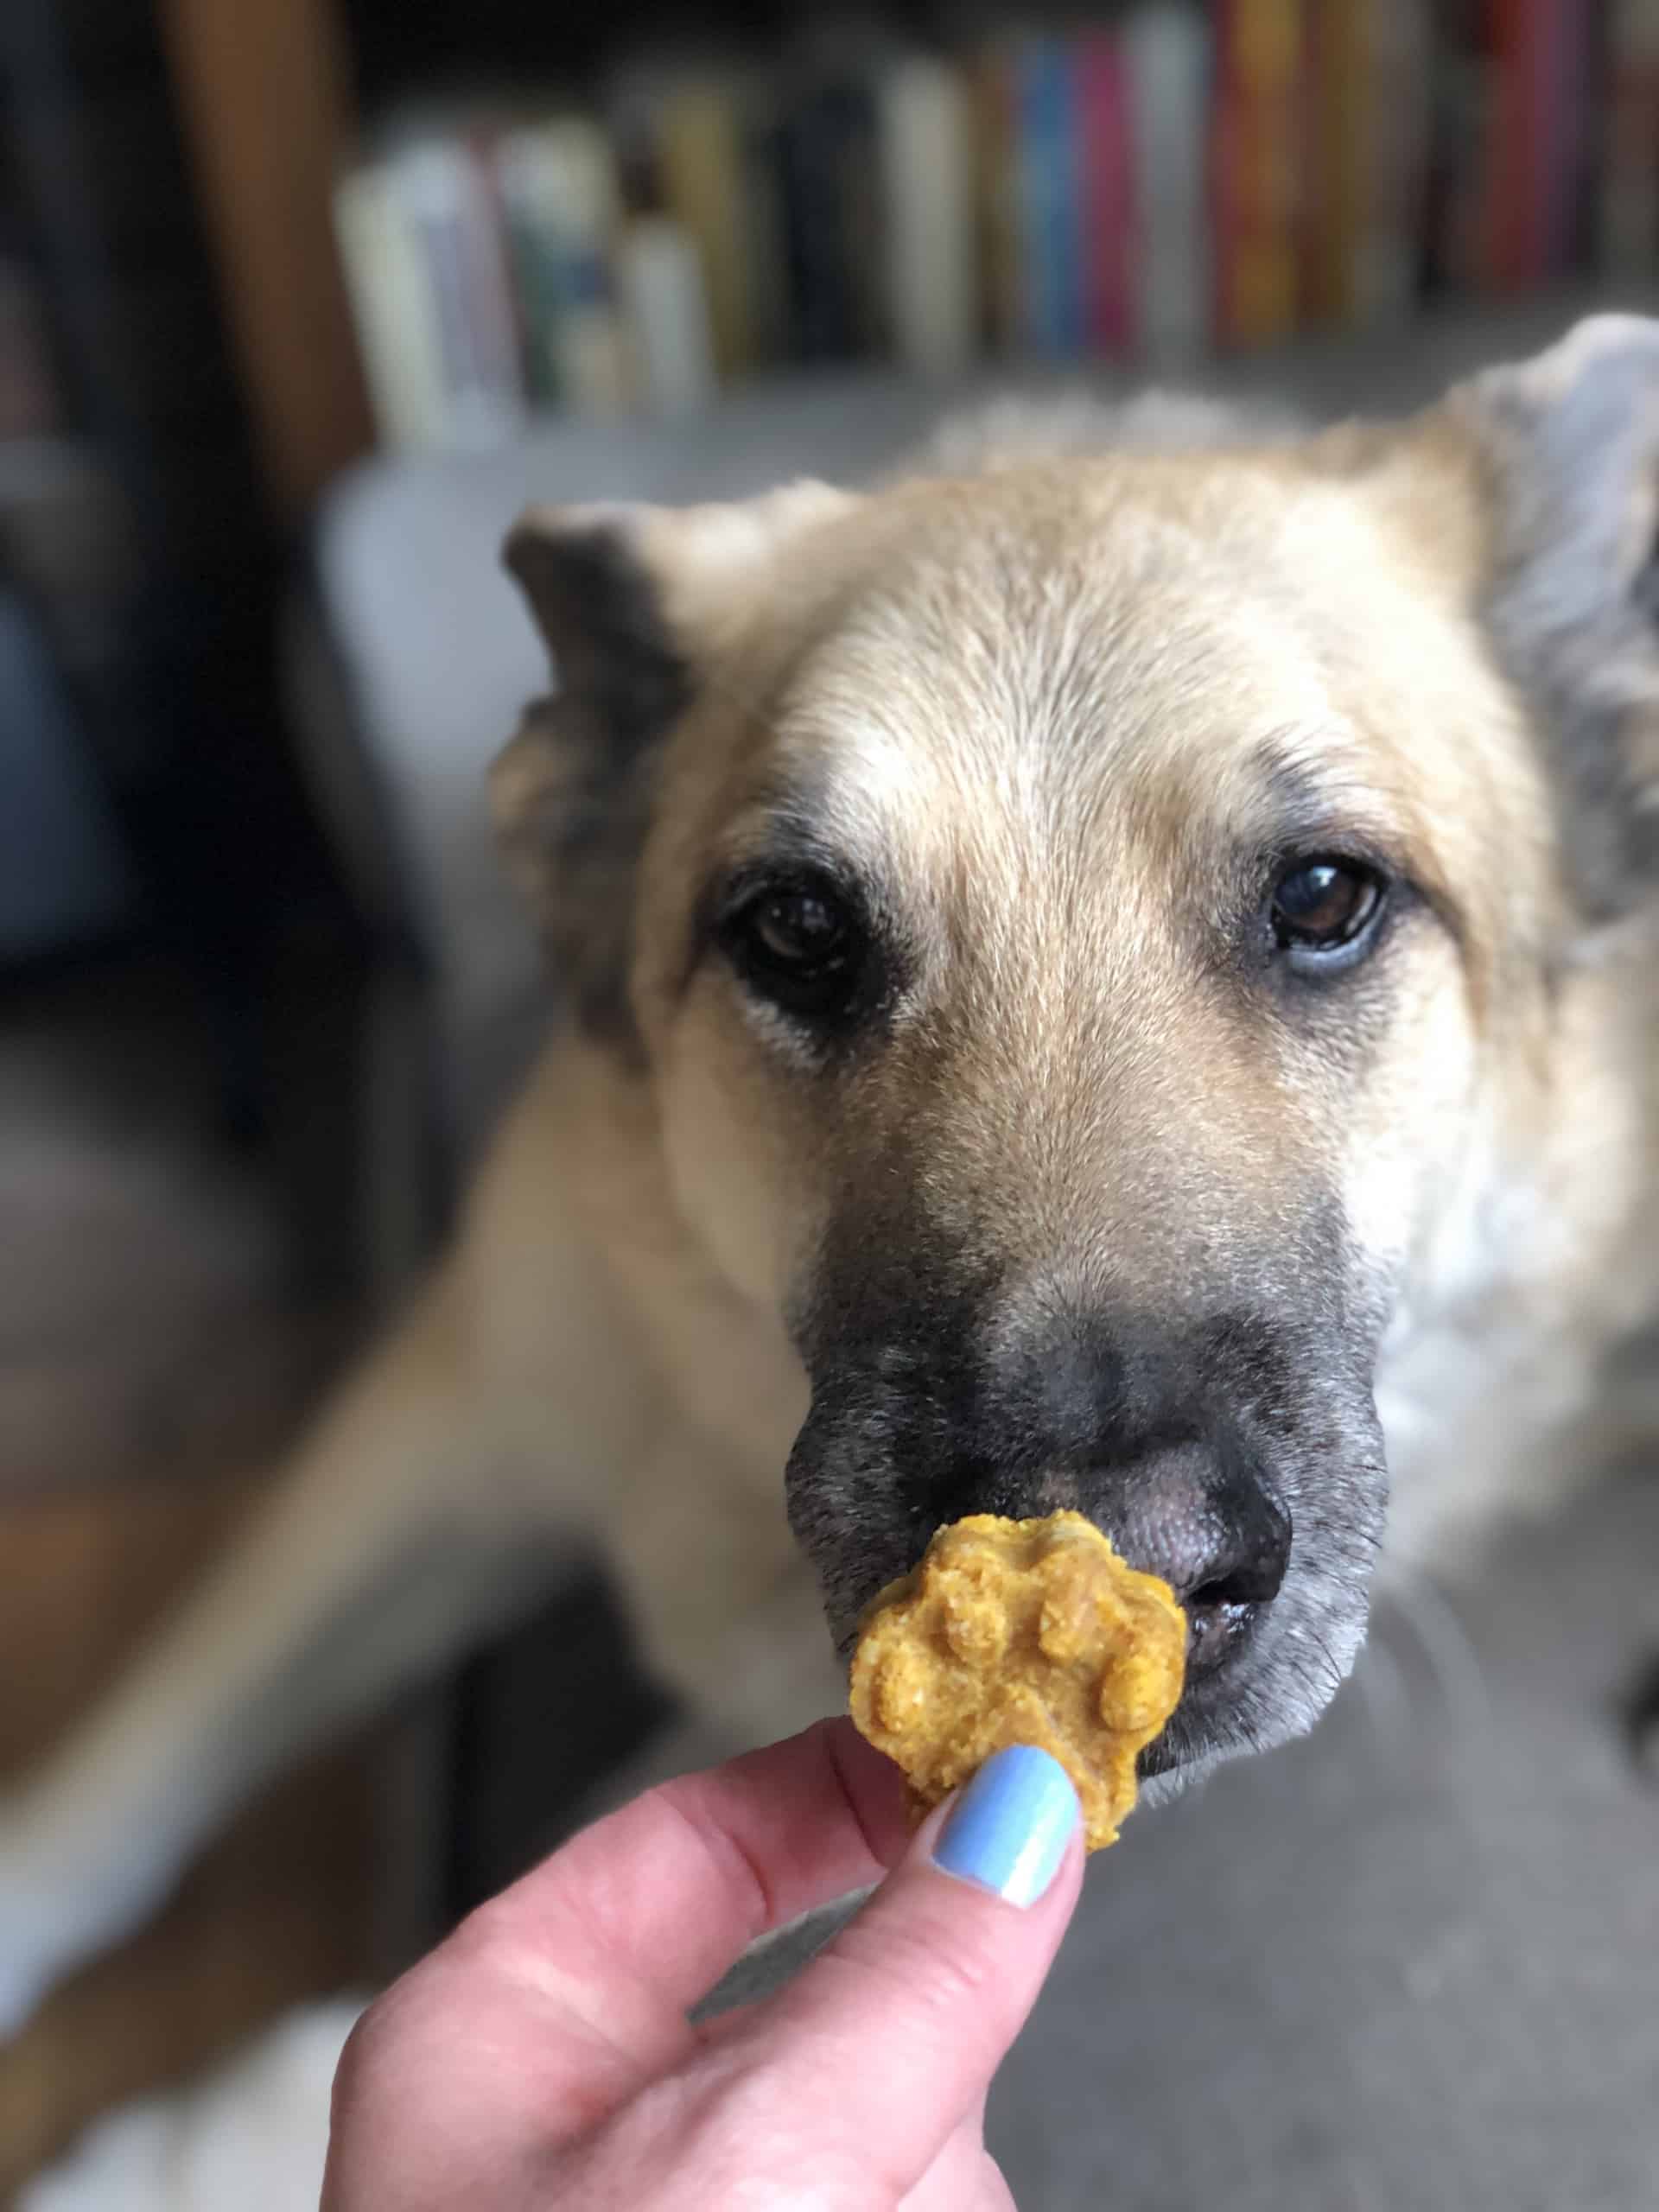 Peanut Butter Dog Treats With No Sticking! Another Silicone Pan